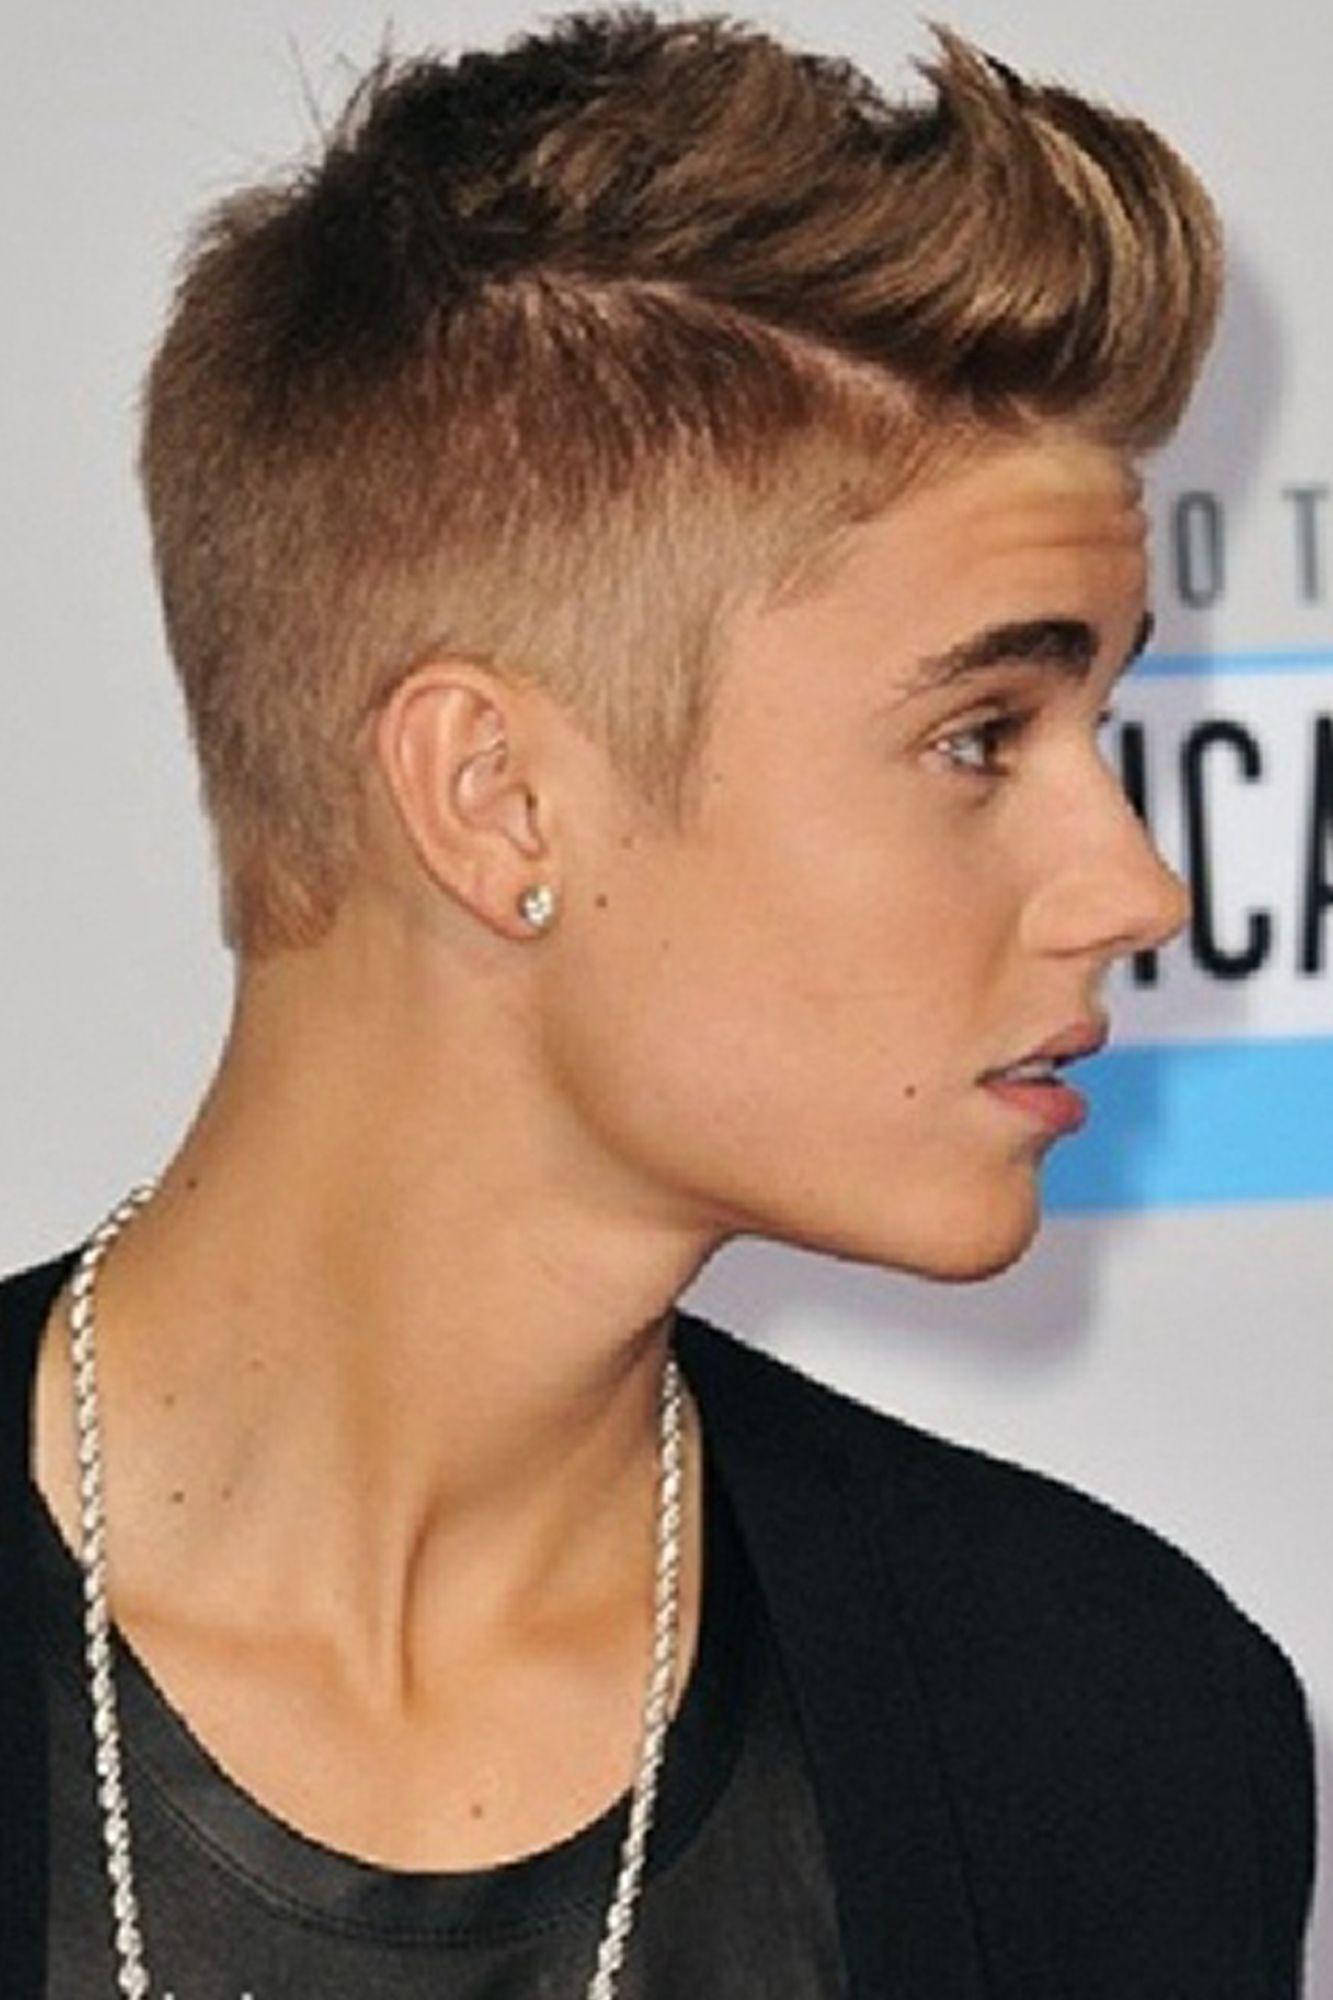 justin bieber hairstyle. Desktop Background for Free HD